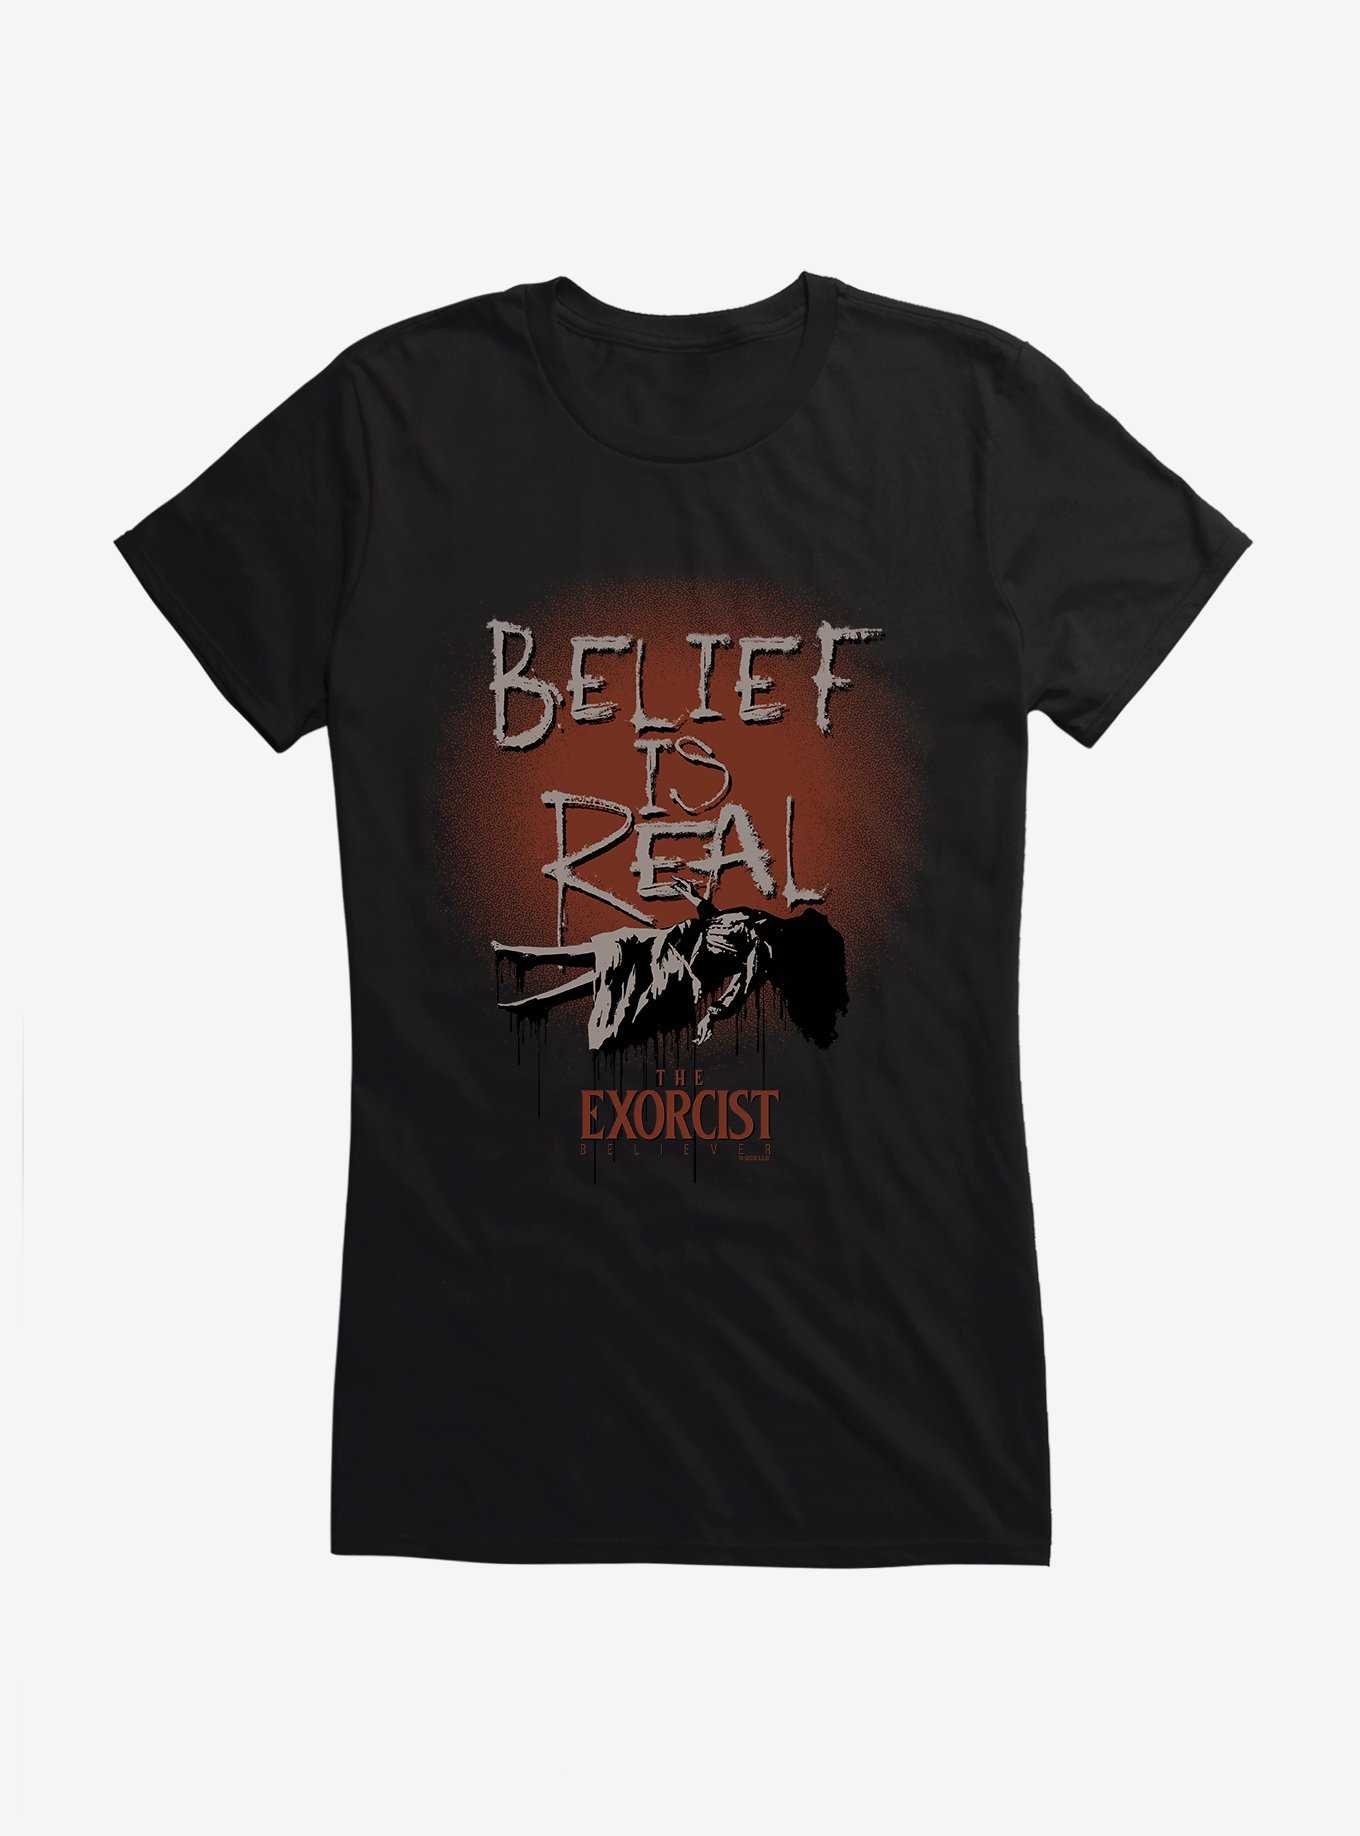 The Exorcist Believer Belief Is Real Girls T-Shirt, , hi-res